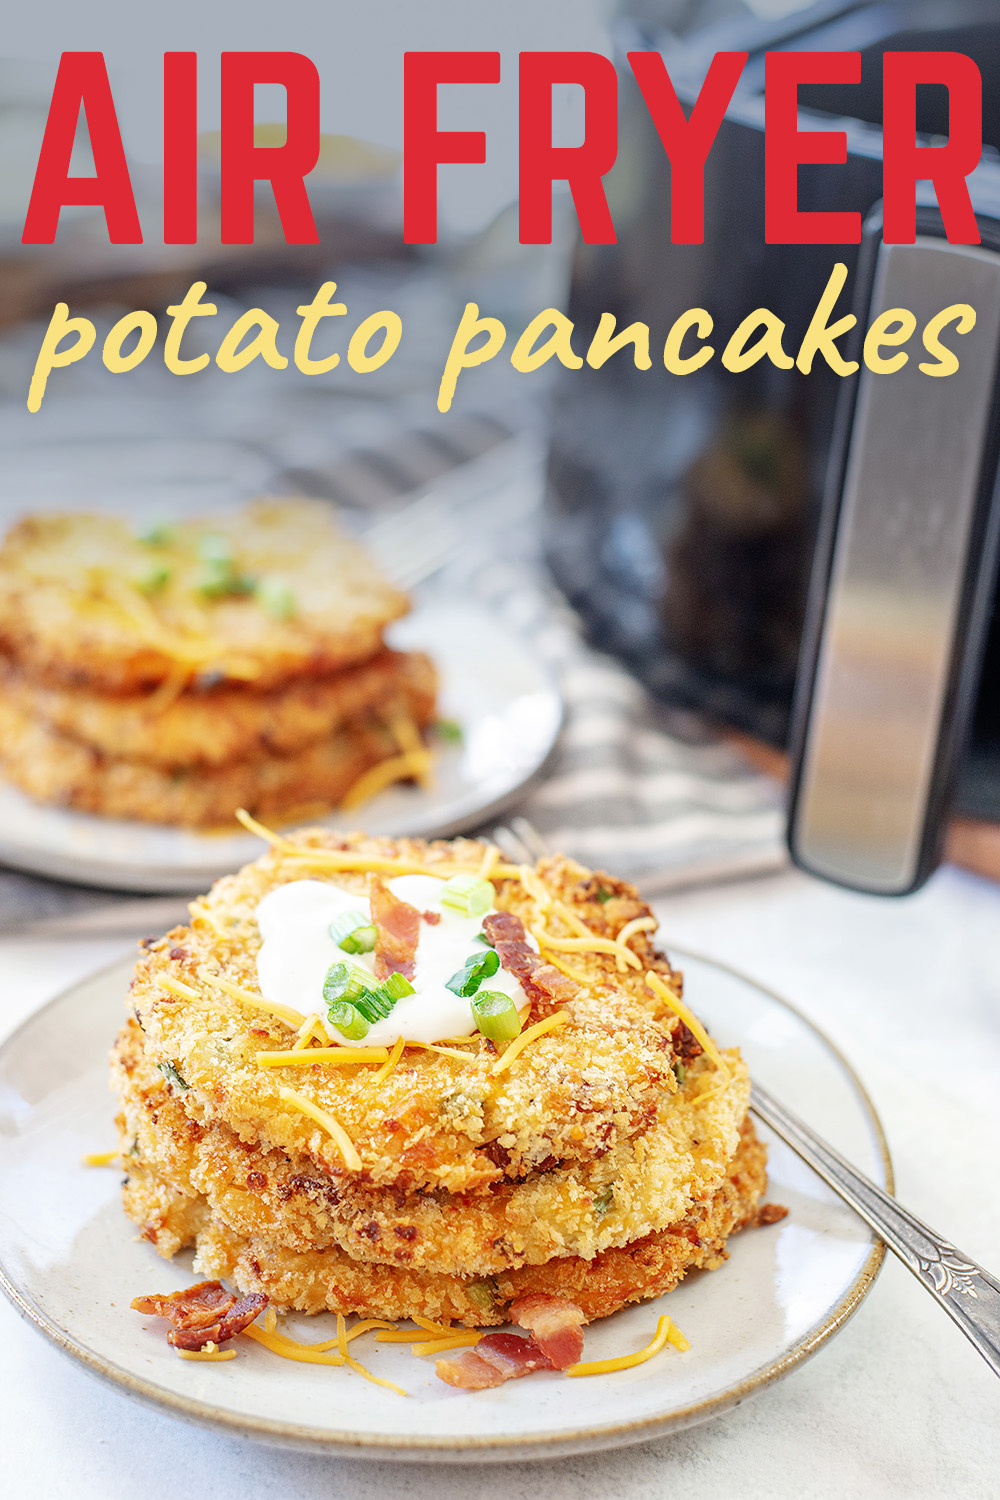 We made these savory potato pancakes  in our air fryer.  They cook crisp and even in just 10 minutes!